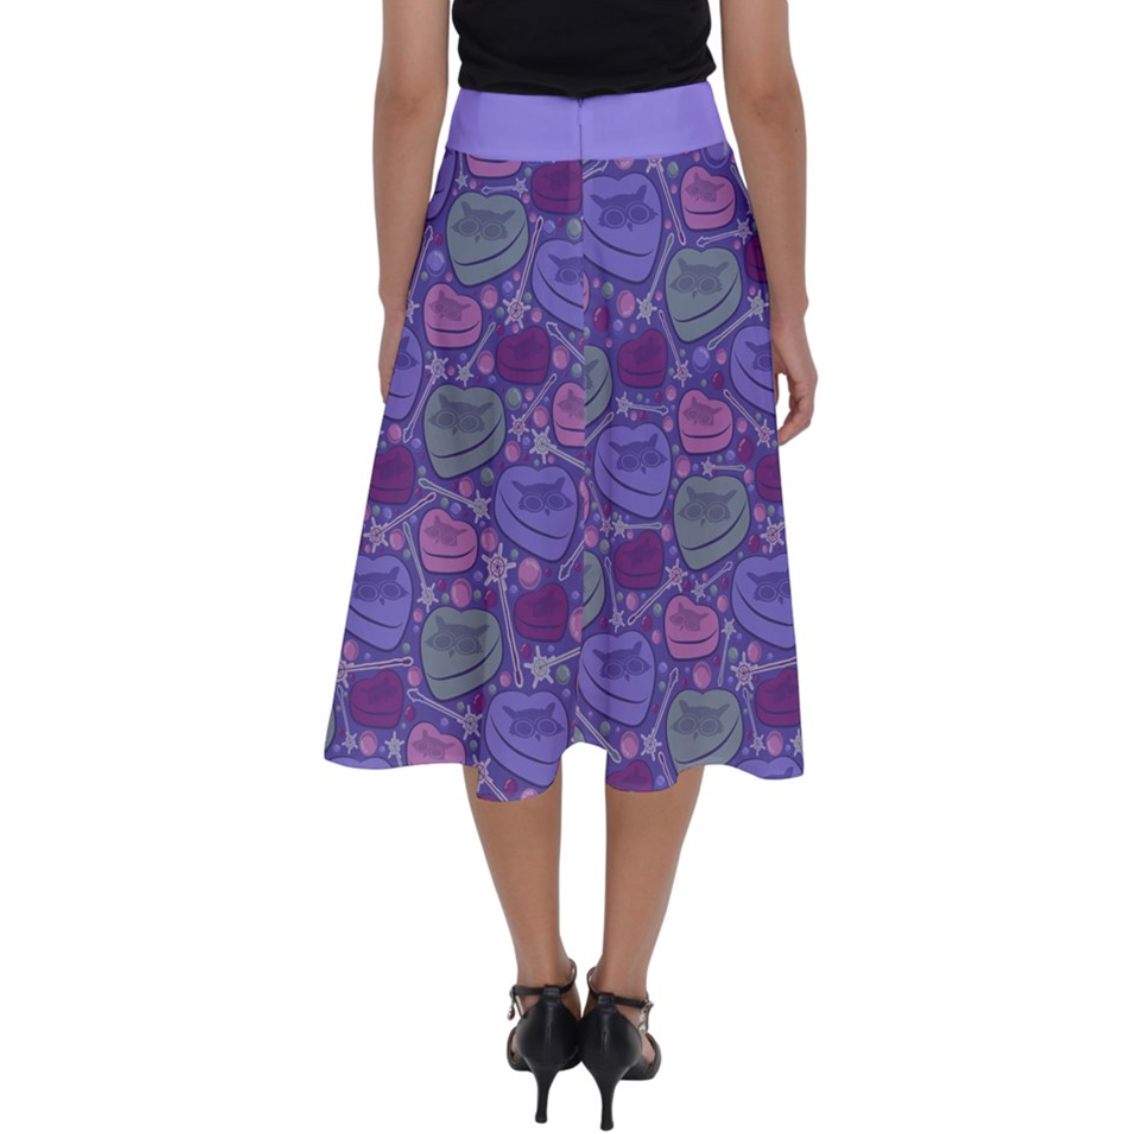 Charmed Perfect Length Midi Skirt (Purple Patterned)